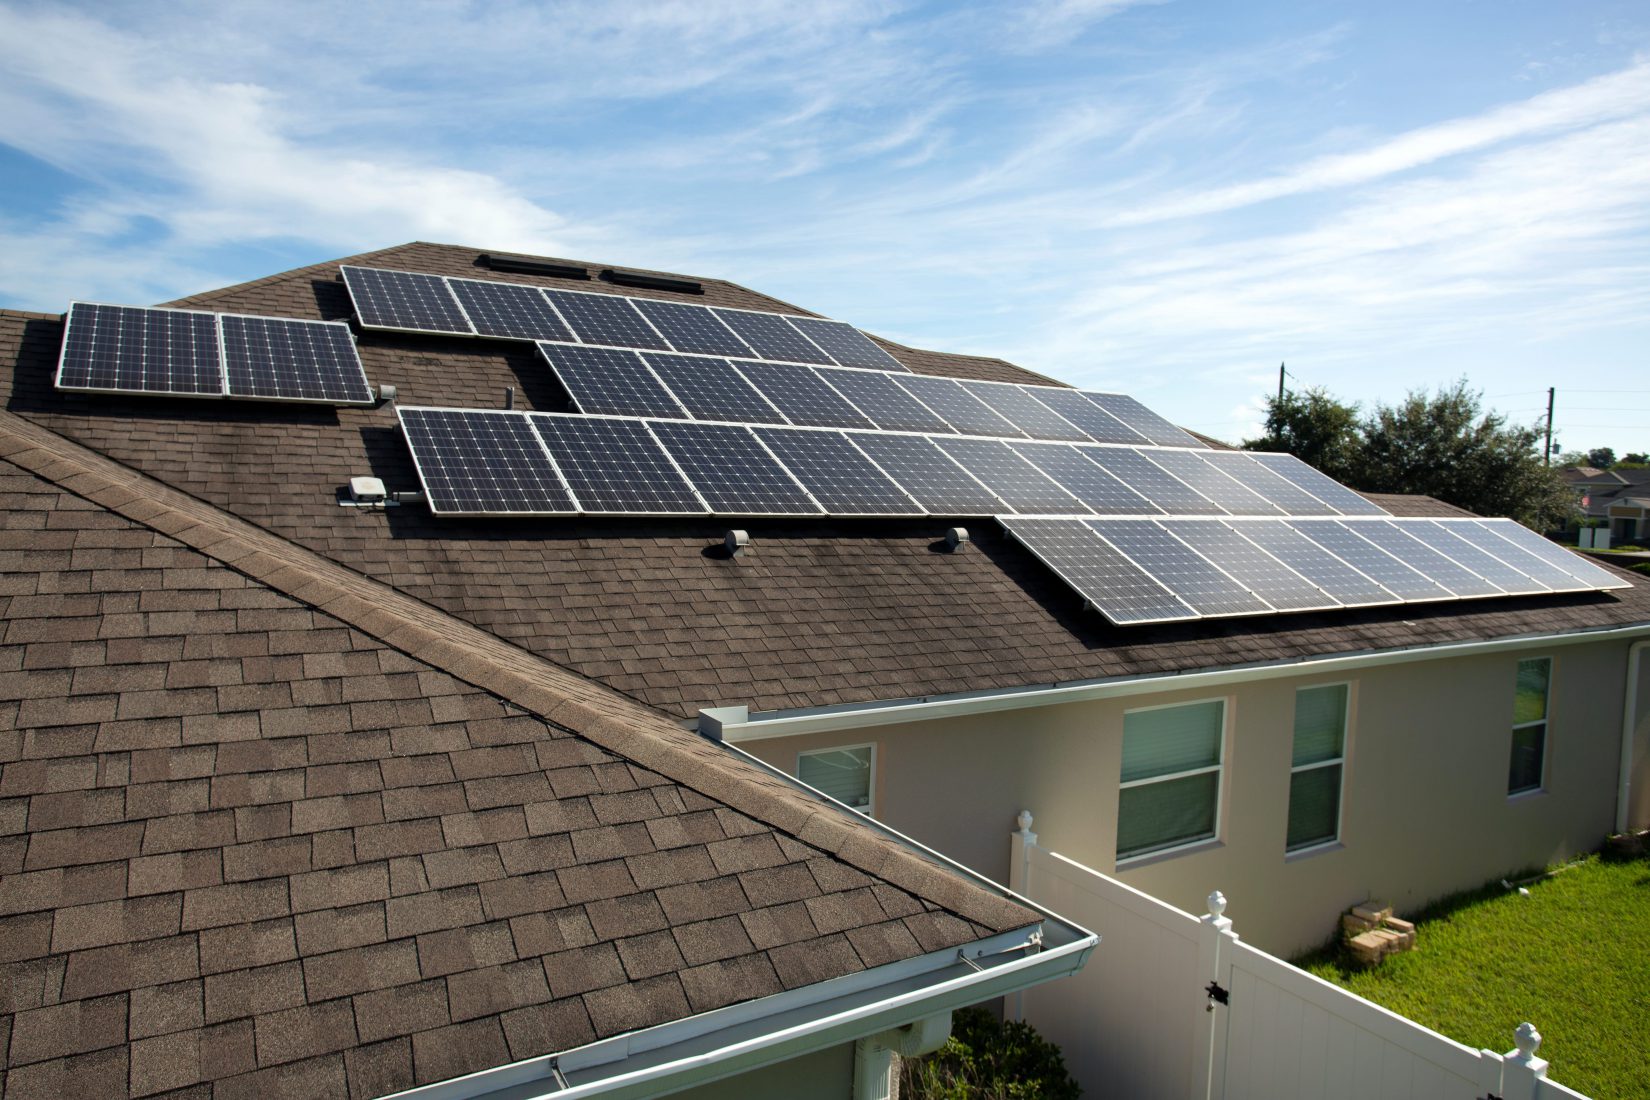 Solar panels on the roof of a residential home